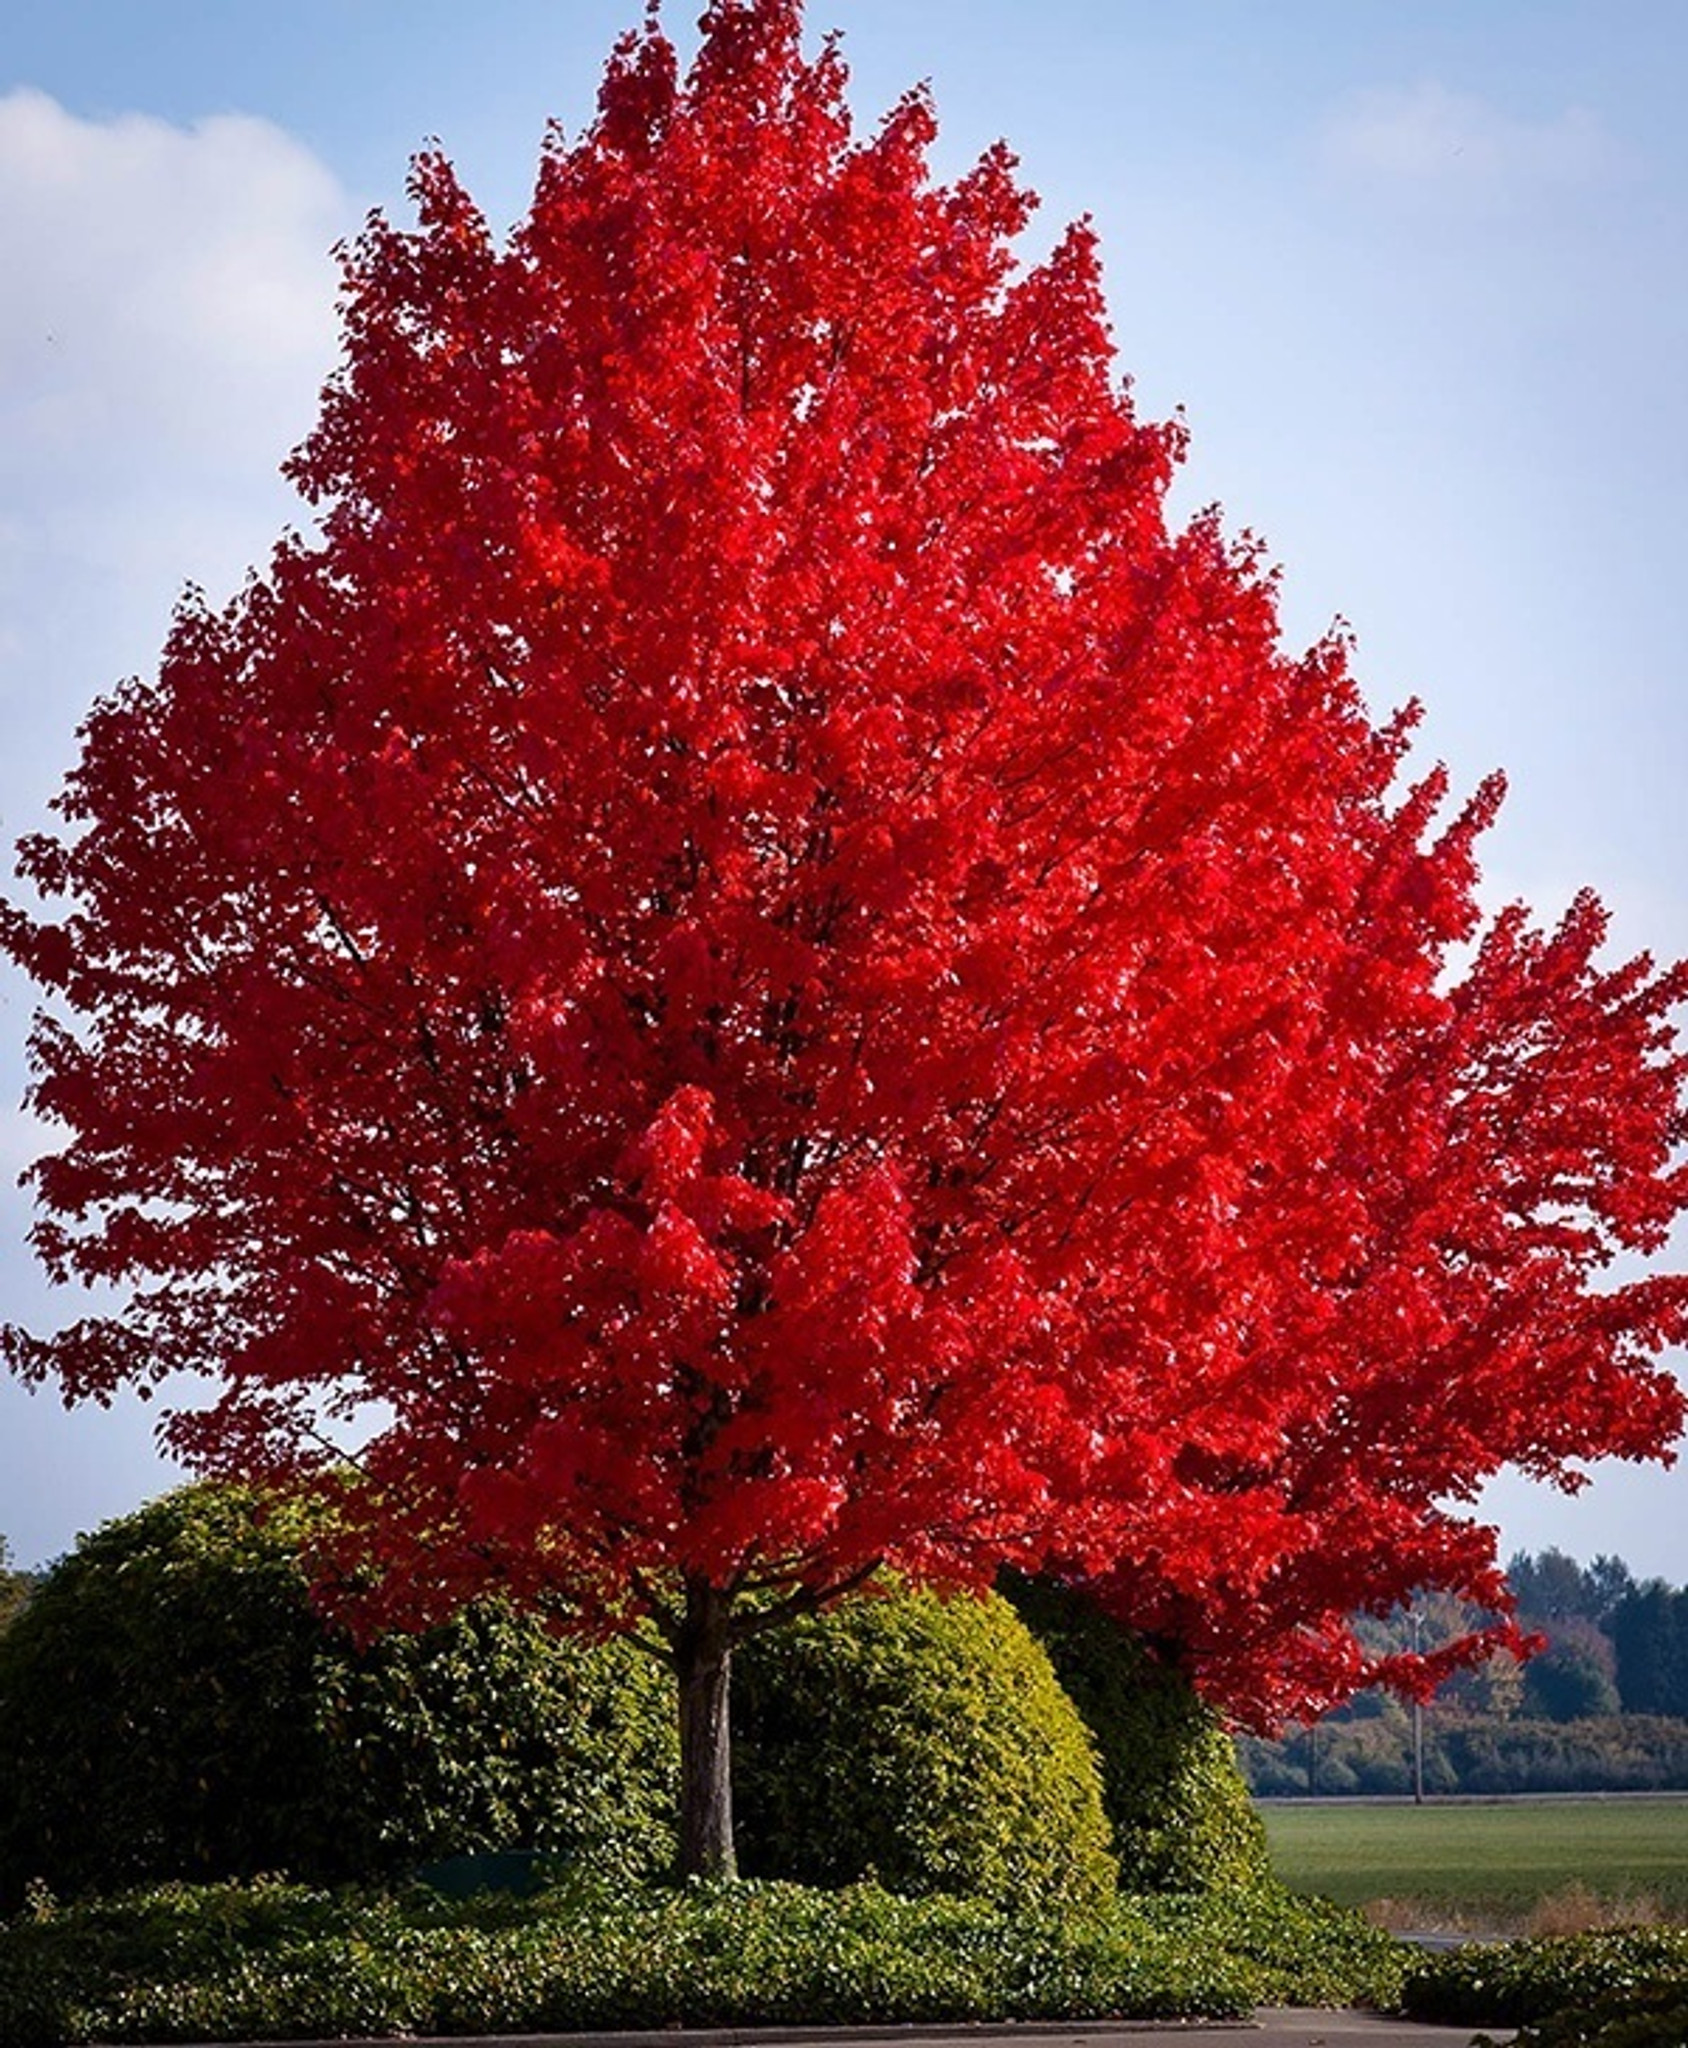 Buy Red Maple Trees Online | Acer Rubrum For Sale